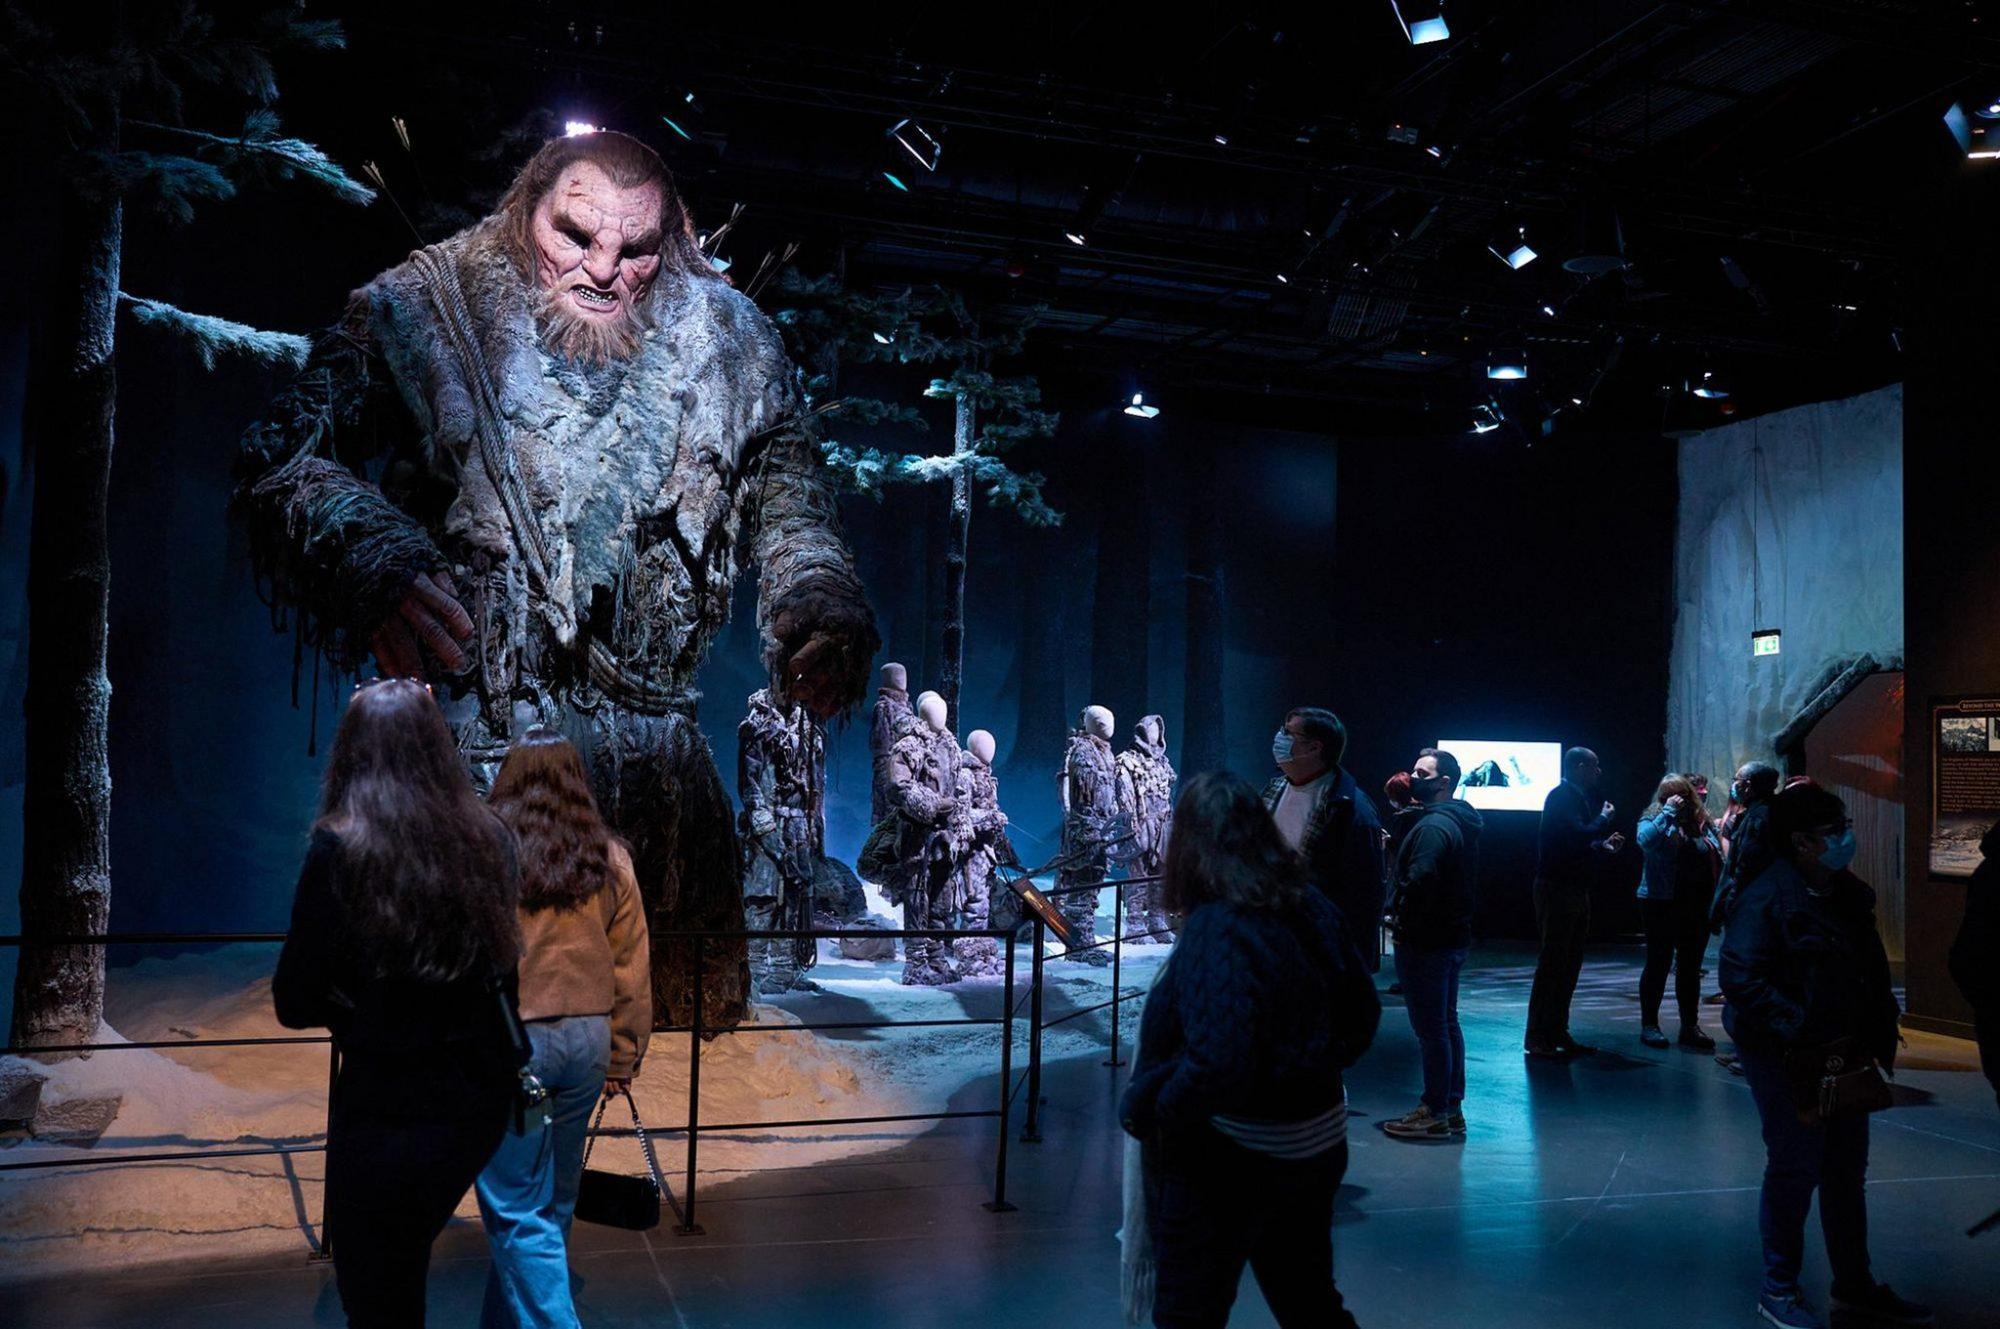 Win An EPIC Day out for two at Game of Thrones Studio Tour